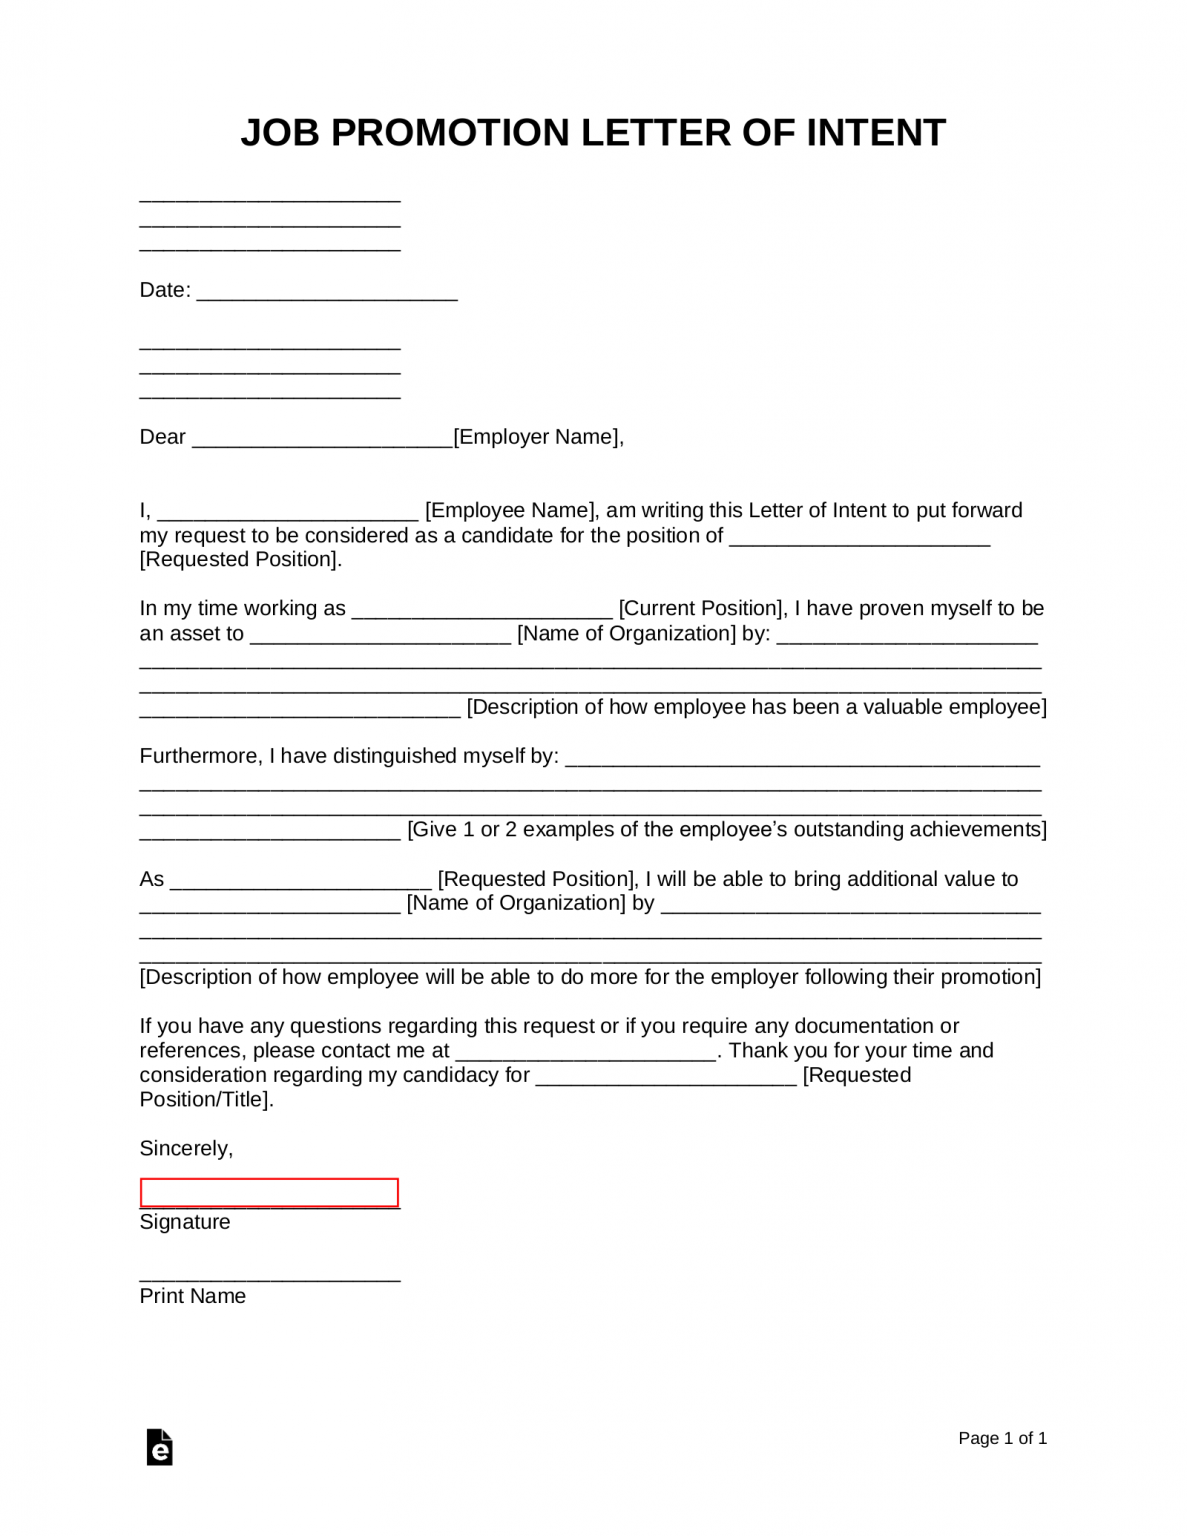 Free Job Promotion Letter of Intent Template - PDF | Word – eForms